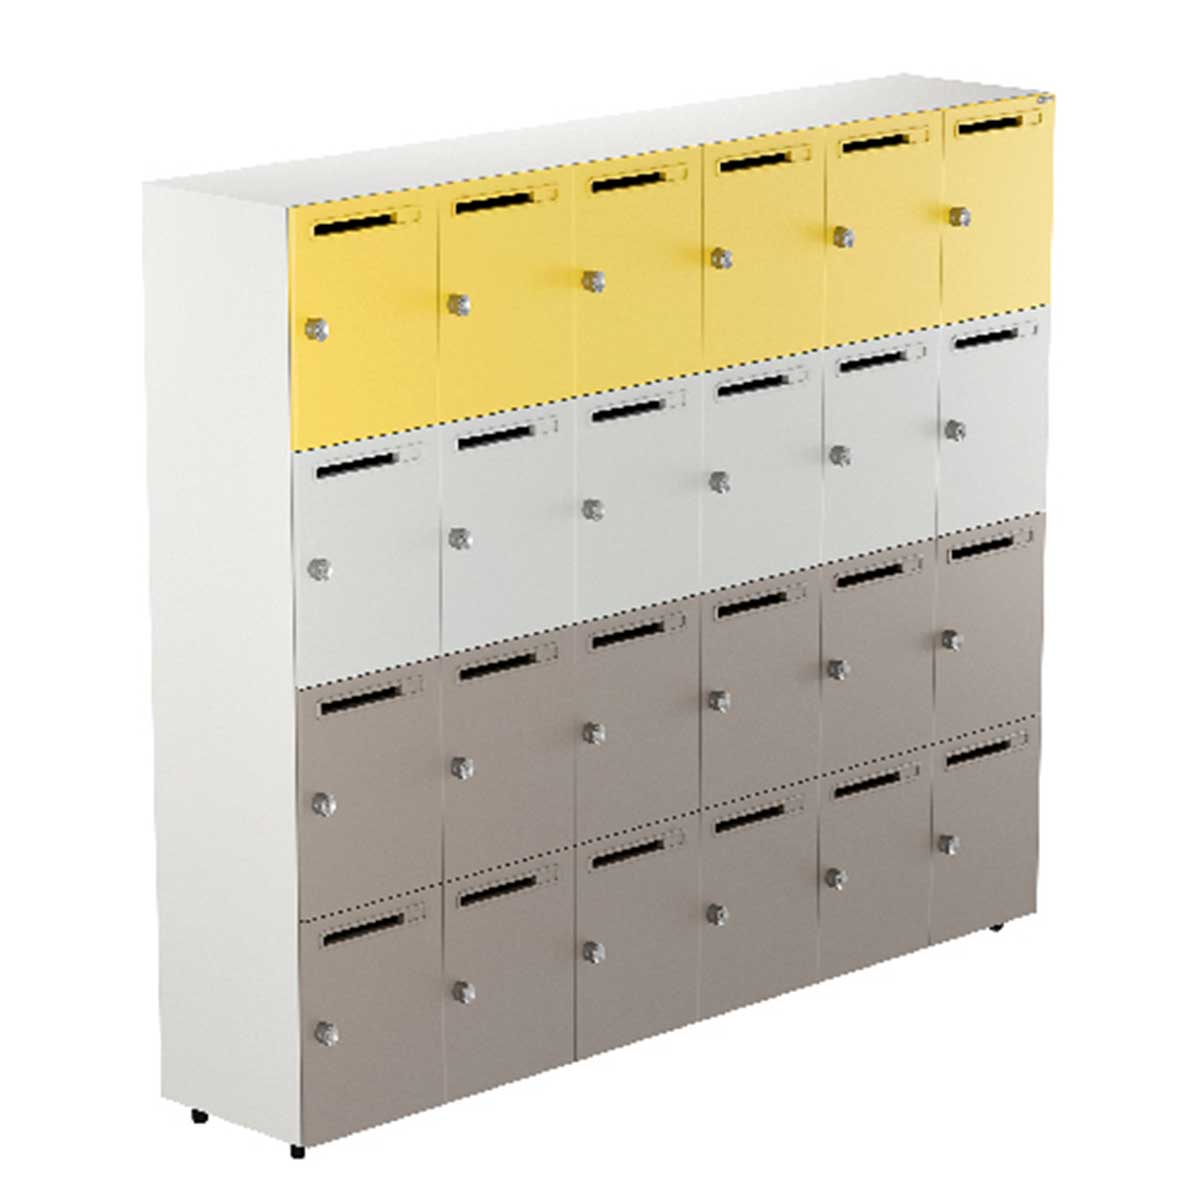 Storage Lockers Manufacturers, Suppliers in Rohini Sector 7